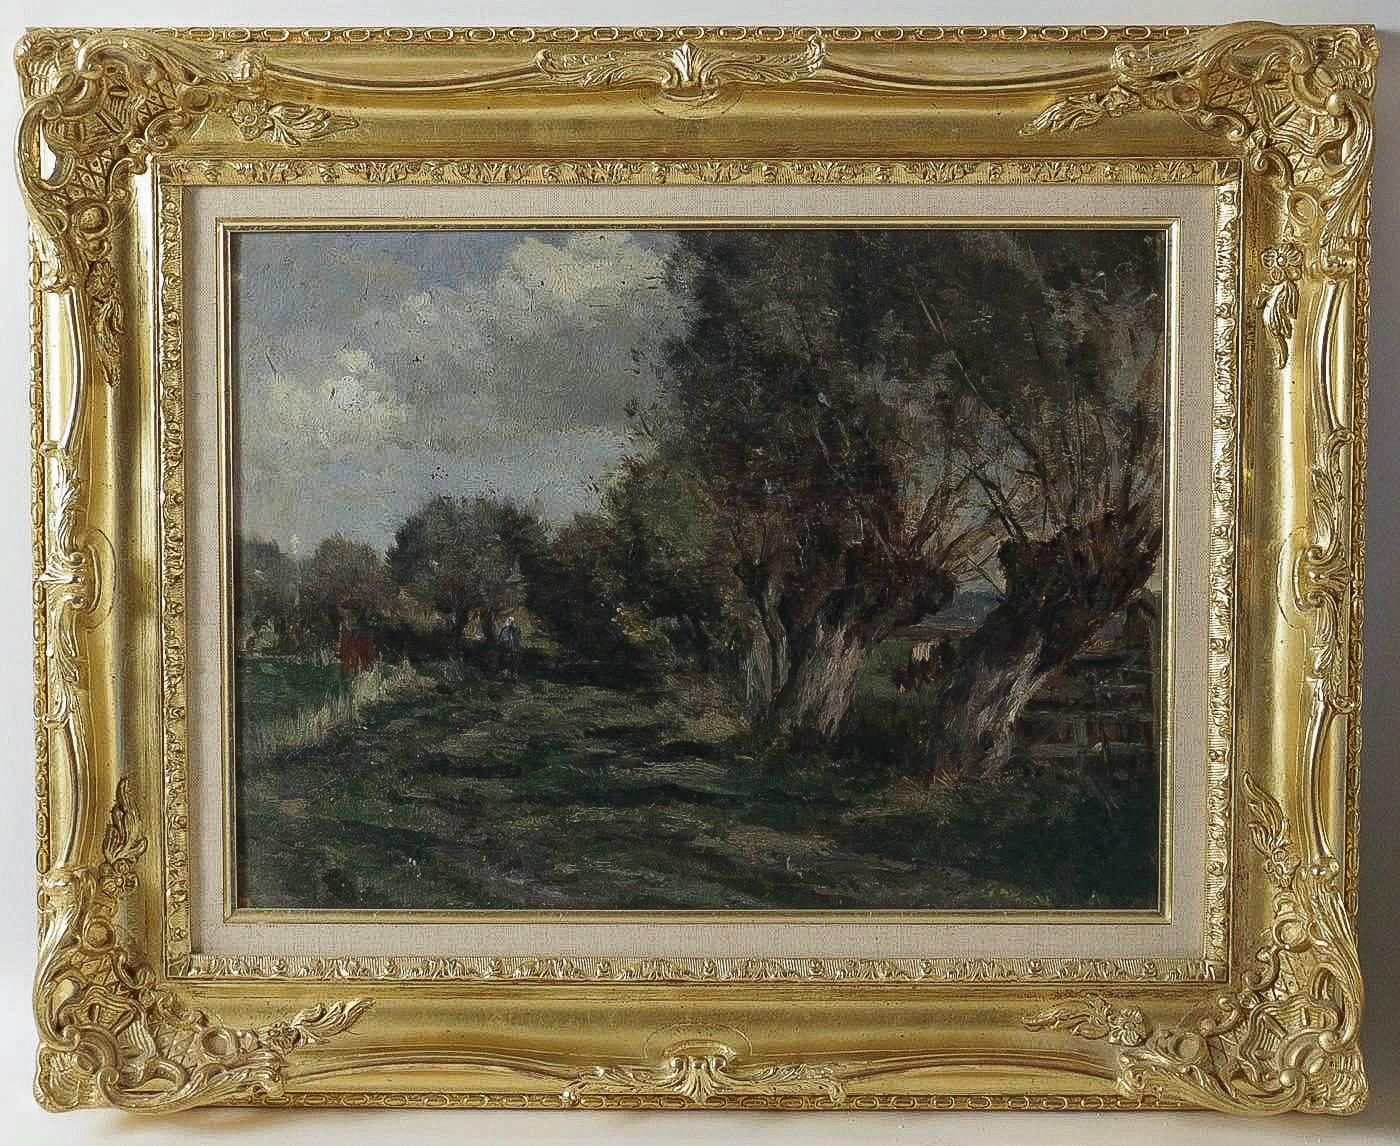 We are pleased to present you a lovely Barbizon school, oil on cardboard depicting a farmer in her field, in a beautiful and ornamental giltwood frame. 

Size unframed: W 17.71 in. - H 13.38 in.
Size with frame: W 23.22 in. - H 18.89 in.

Our